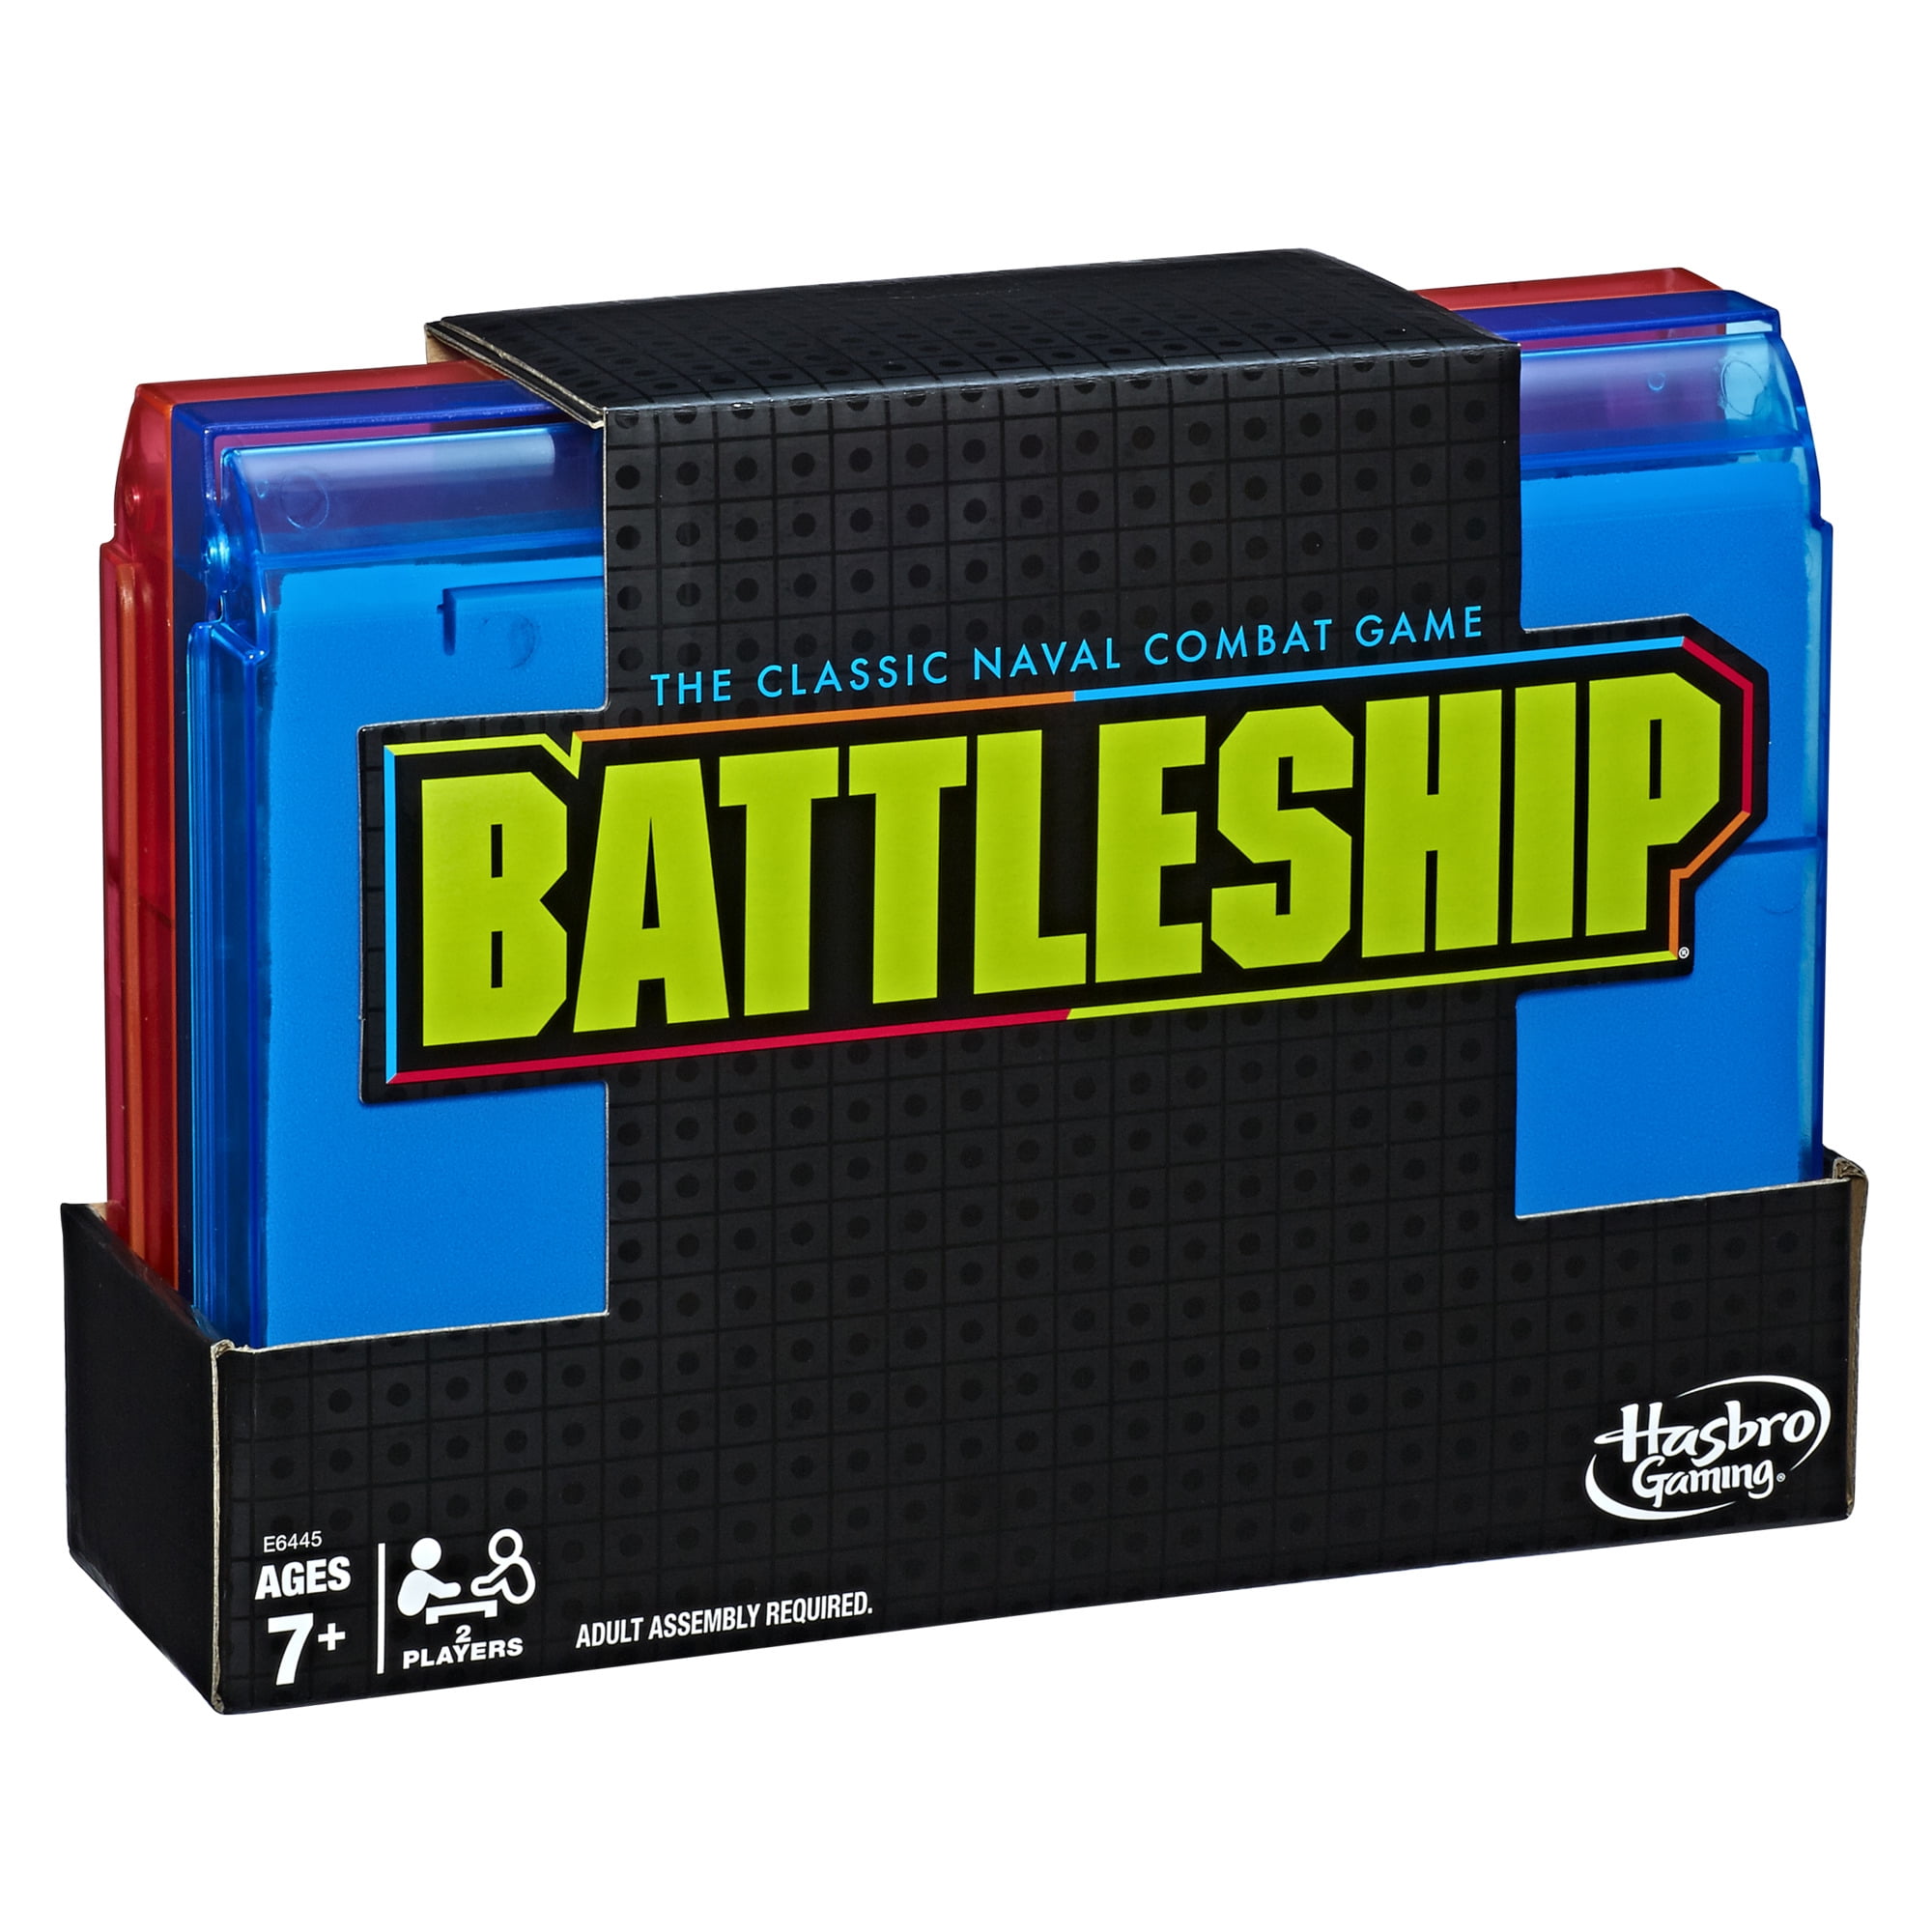 Free Battery ELECTRONIC HANDHELD BOARD GAME TRAVEL MB CLEAR KID TOY BATTLESHIP 